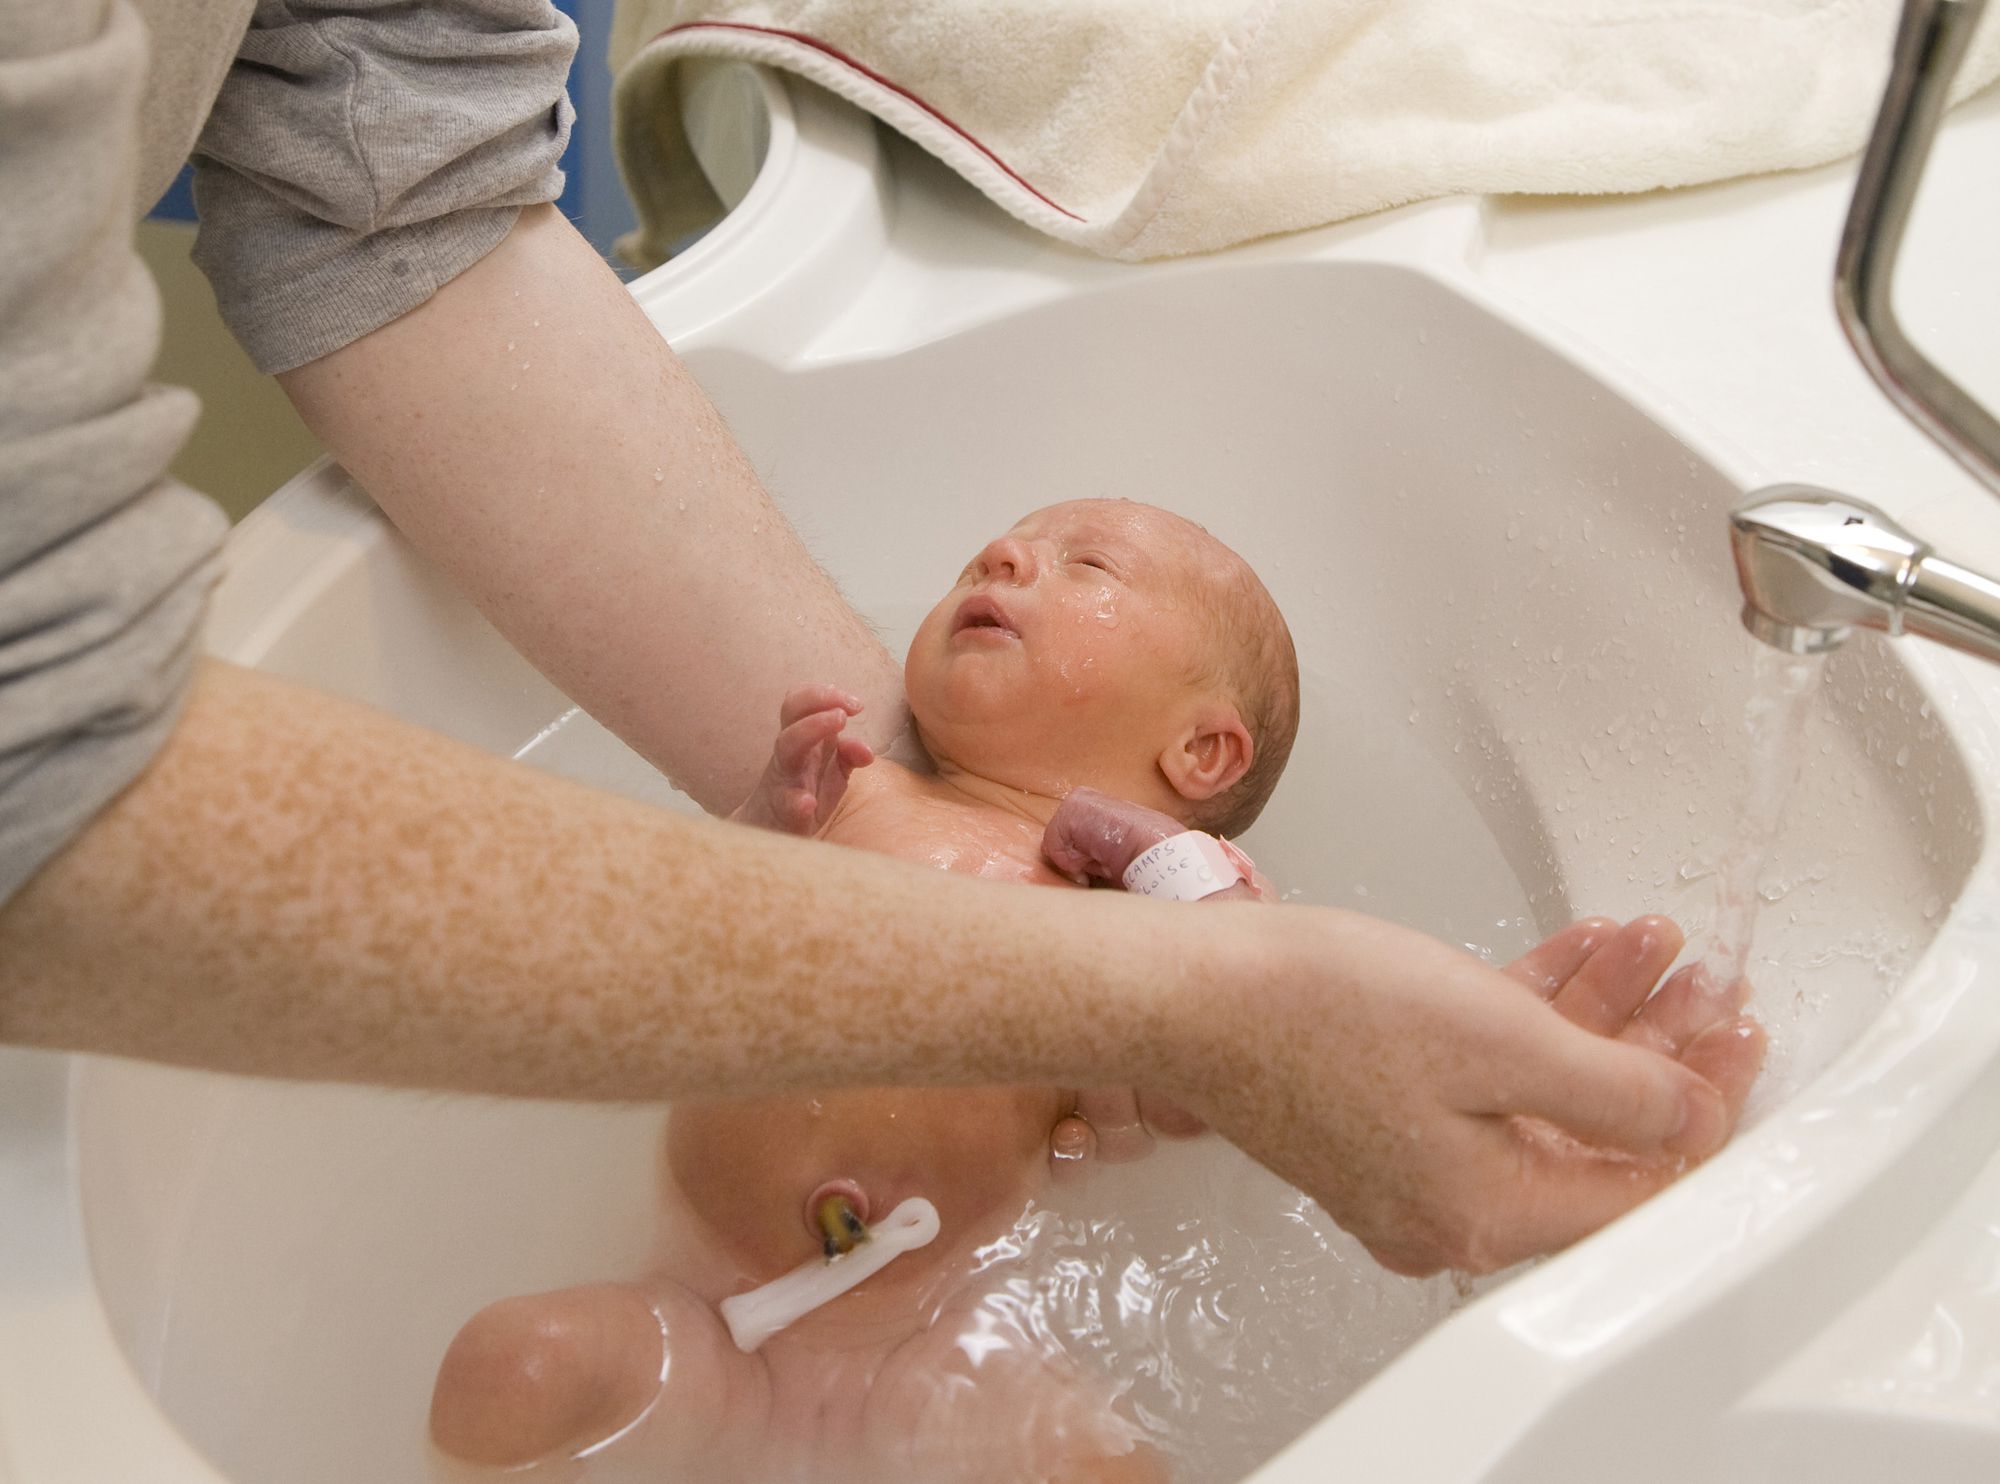 How Do I Give My Premature Baby a Bath?